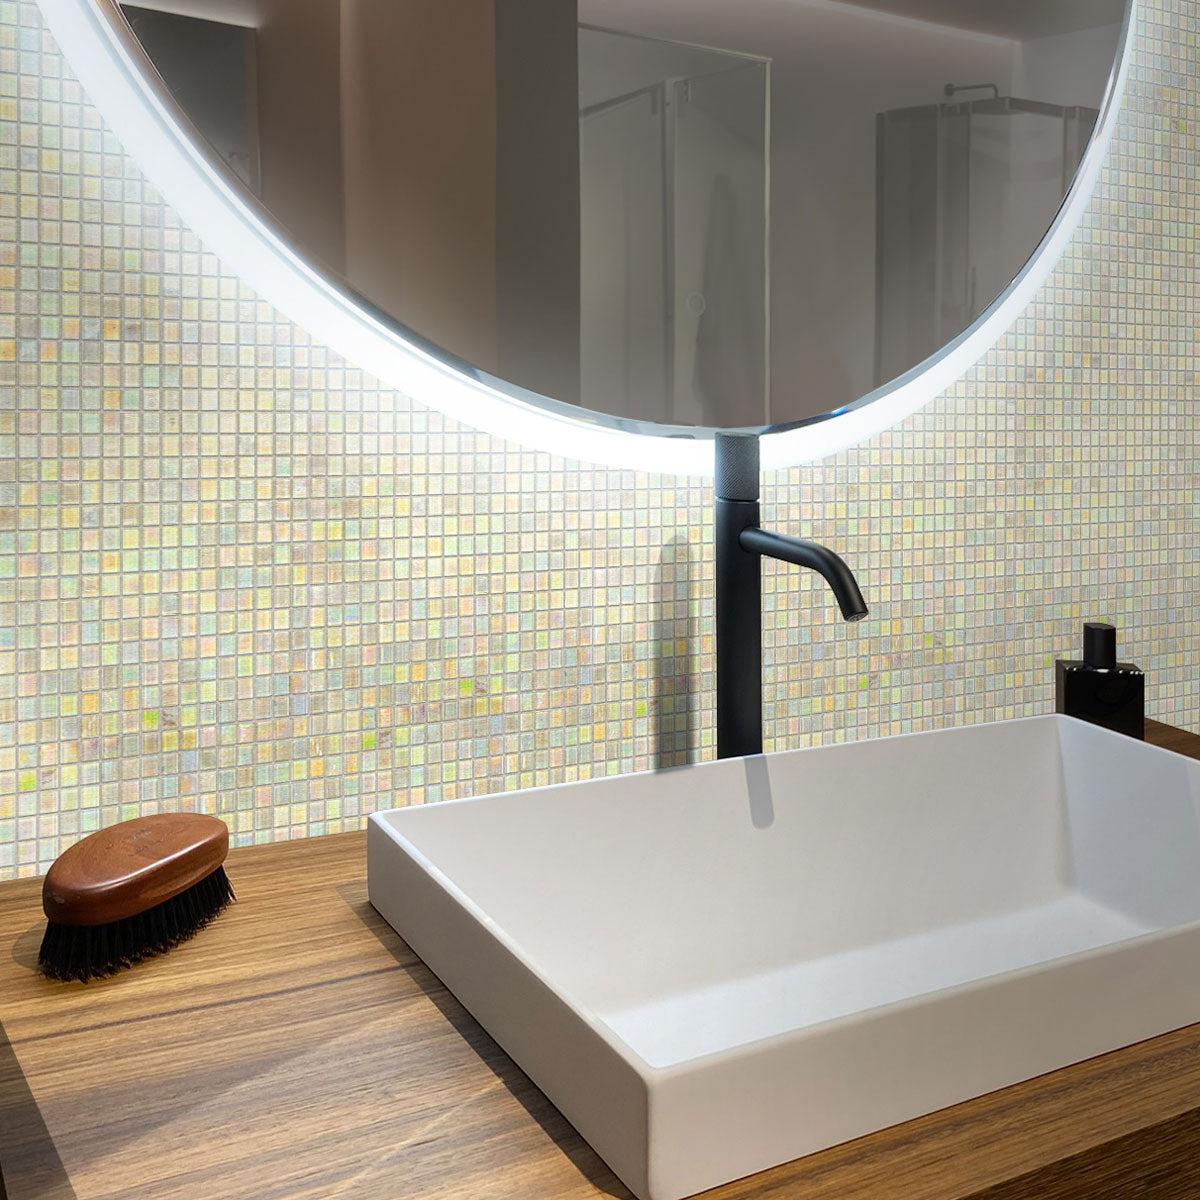 The bathroom glistens with Pearlescent Clear Squares Glass Tile accents